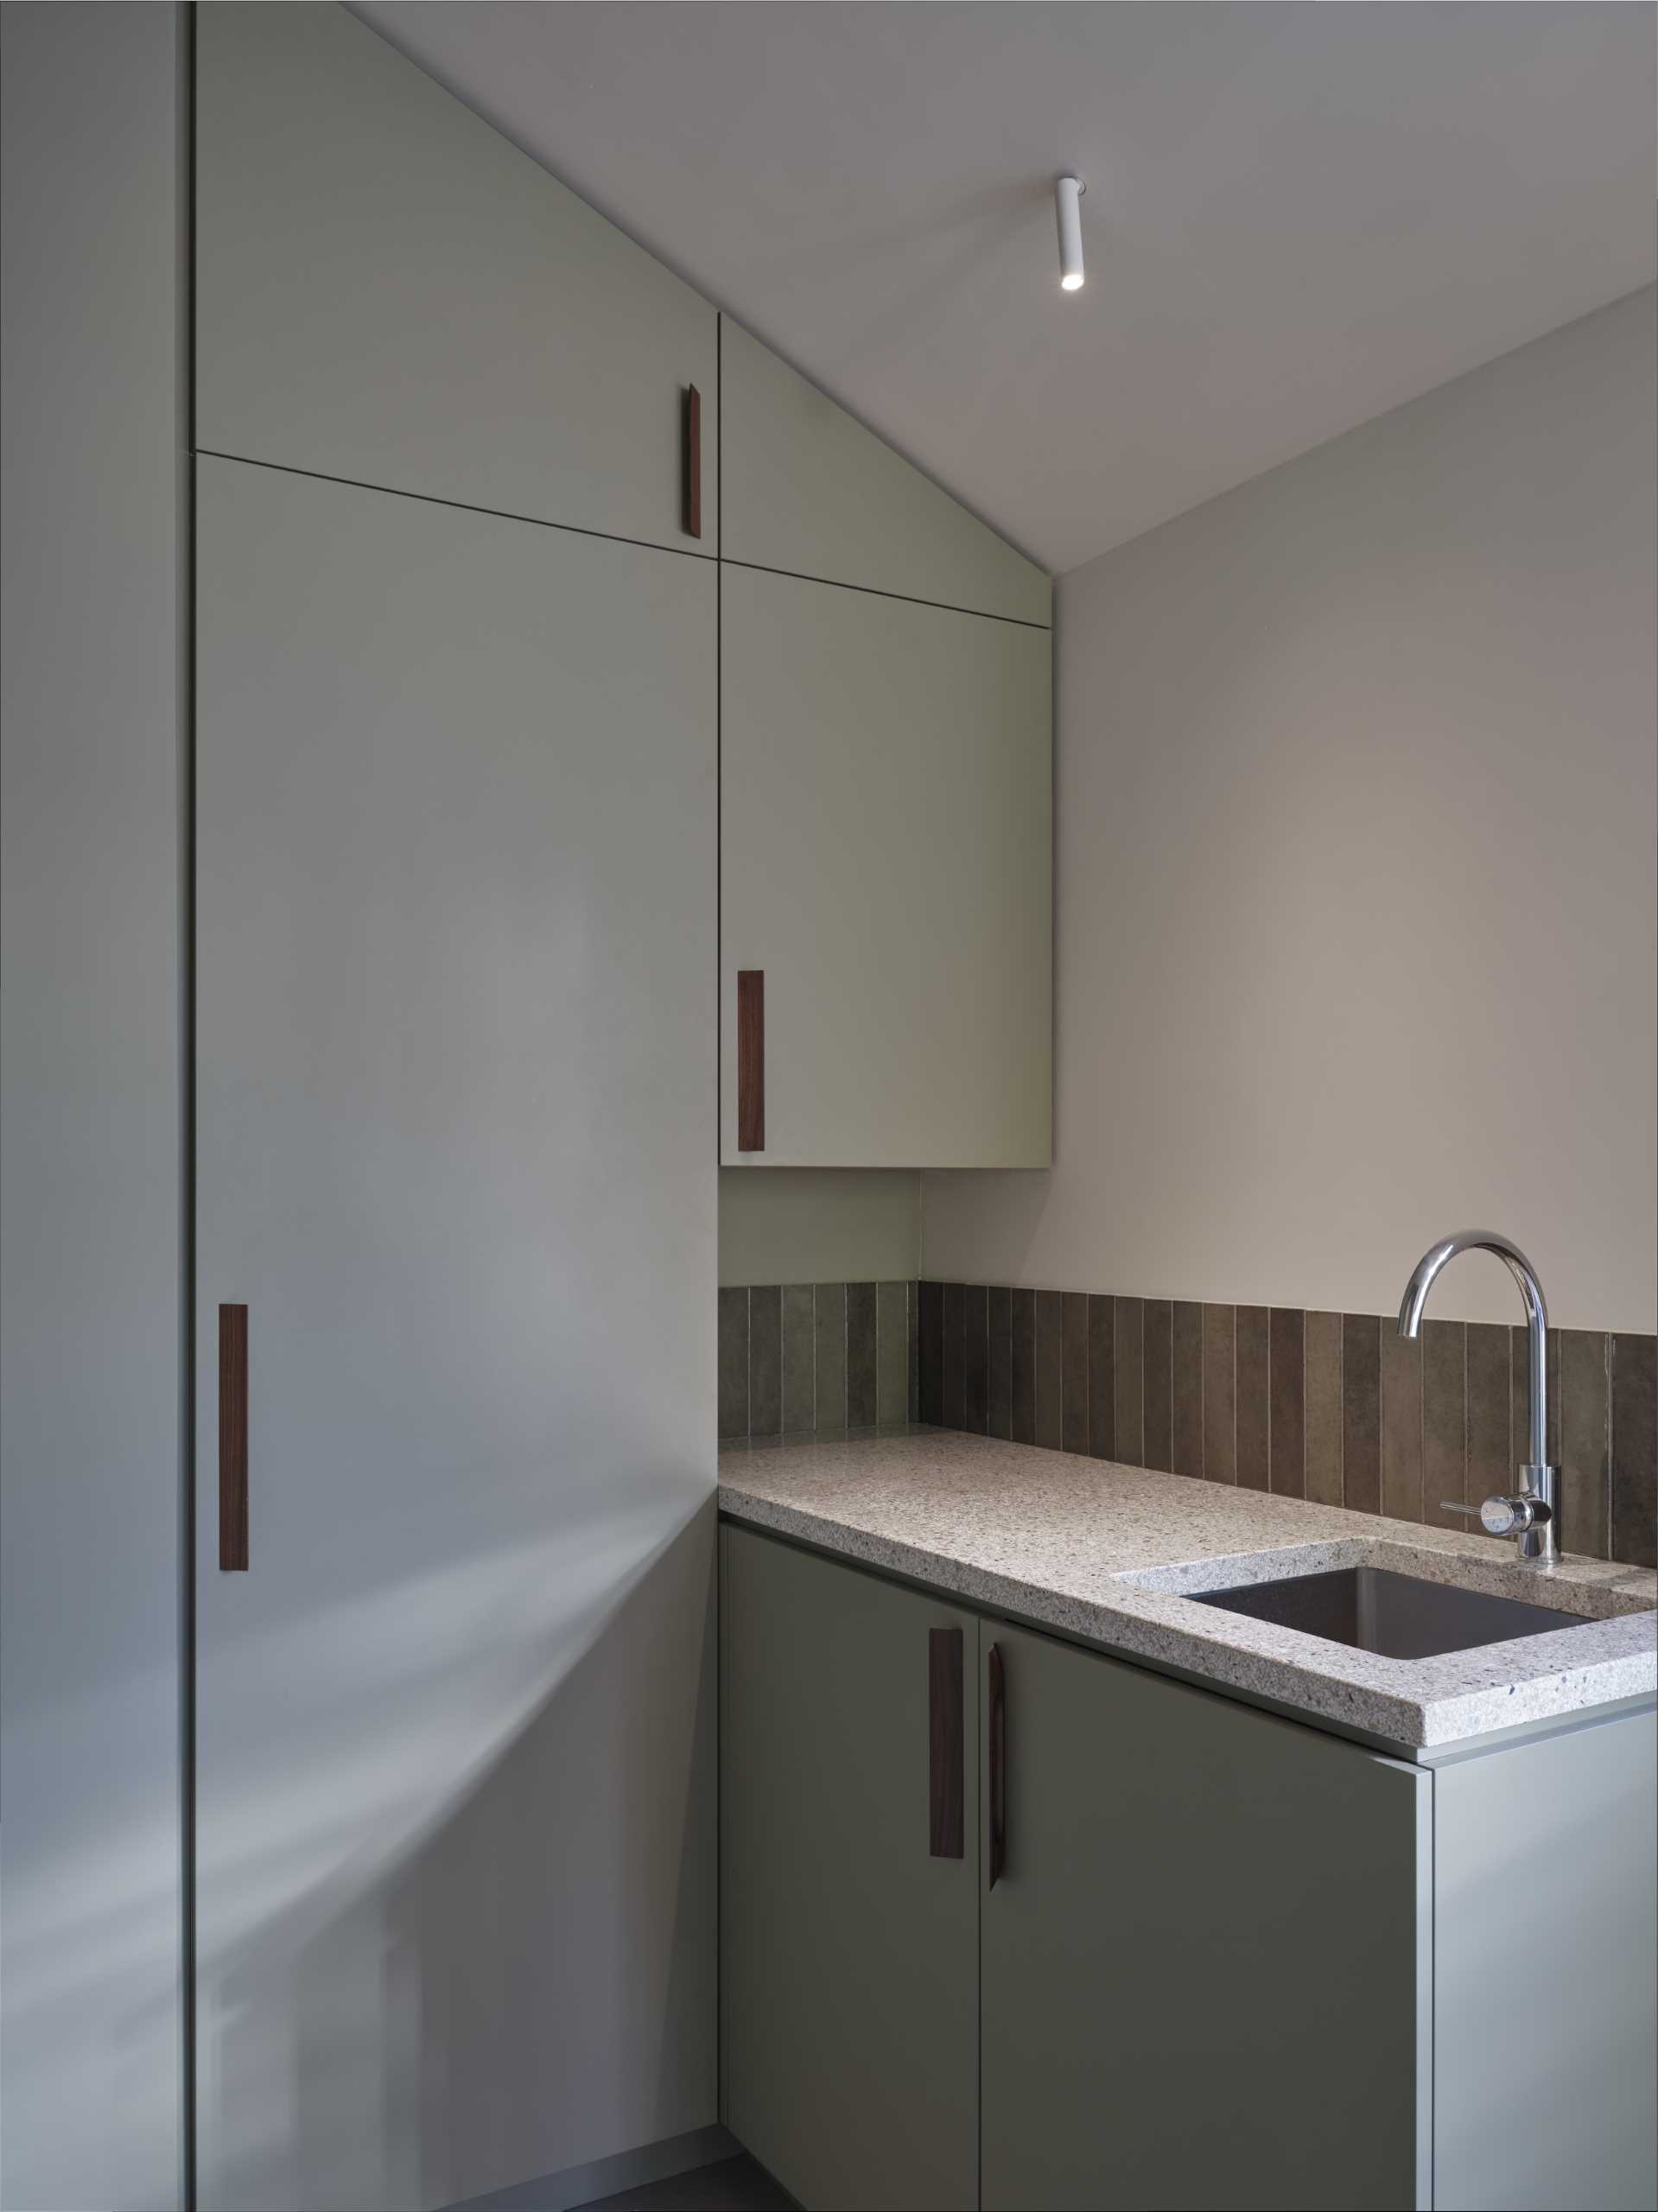 A modern laundry room with terrazzo countertop and sink, and matte green cabinets.